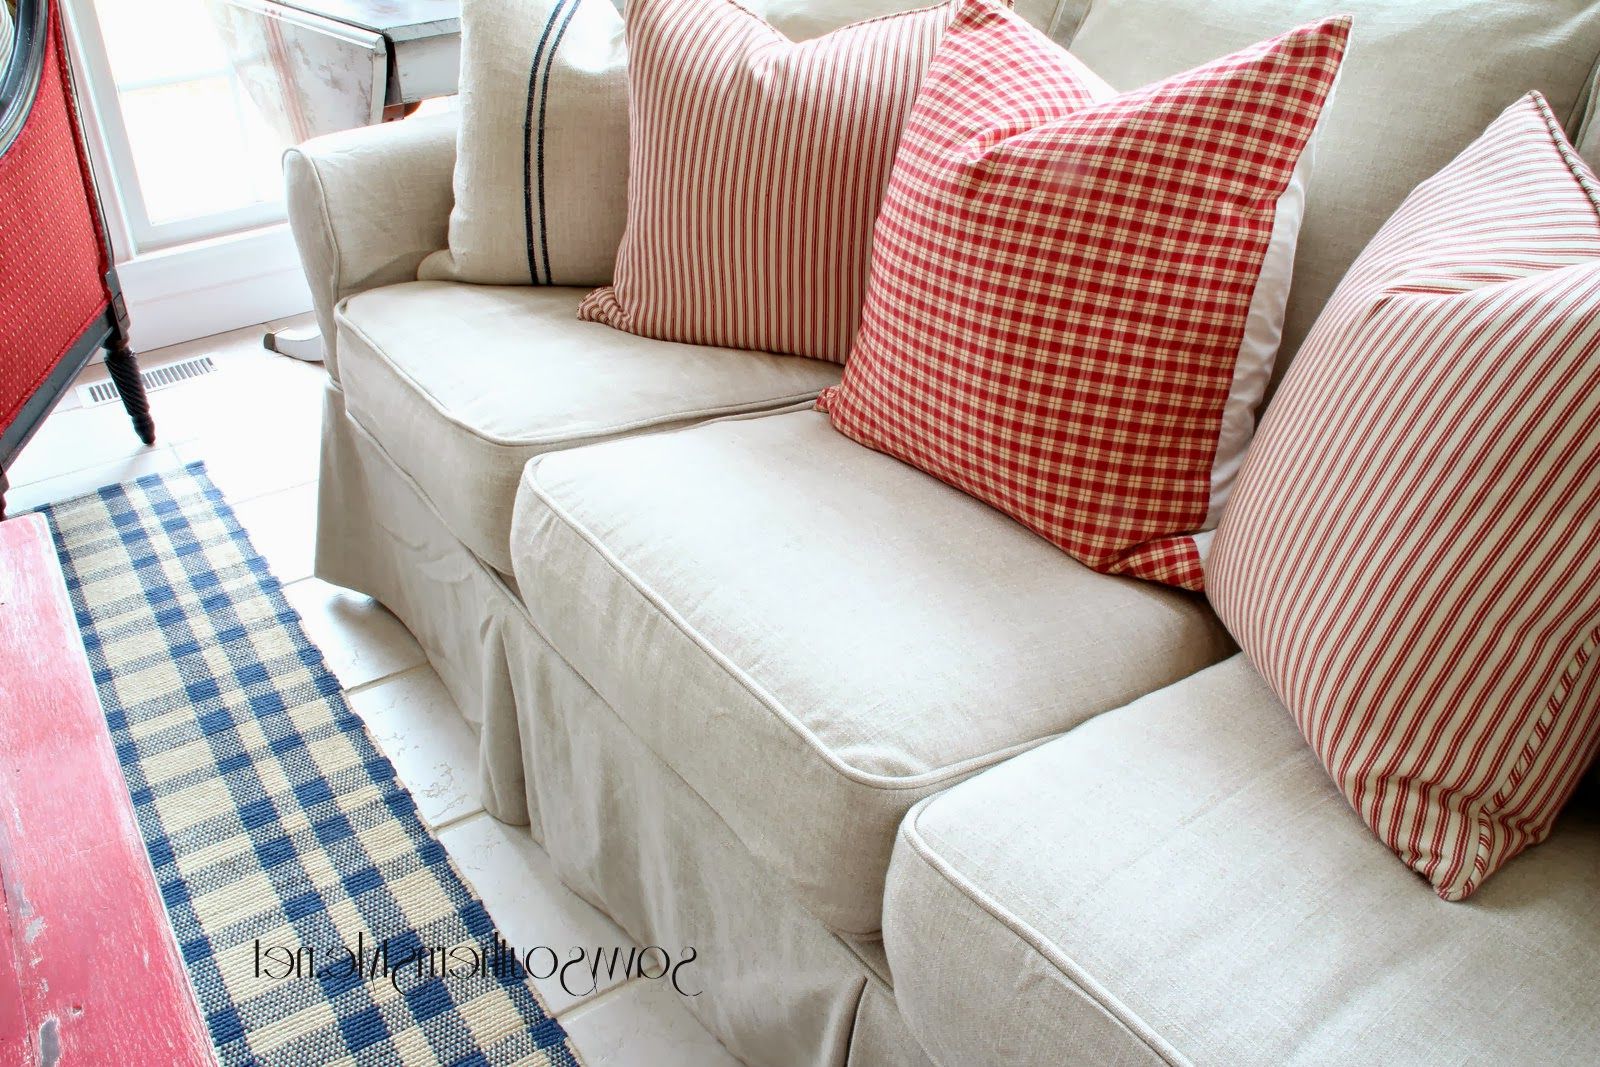 Most Recent Custom Slipcovers And Couch Cover For Any Sofa Online Inside Slipcovers For Sofas And Chairs (View 3 of 20)